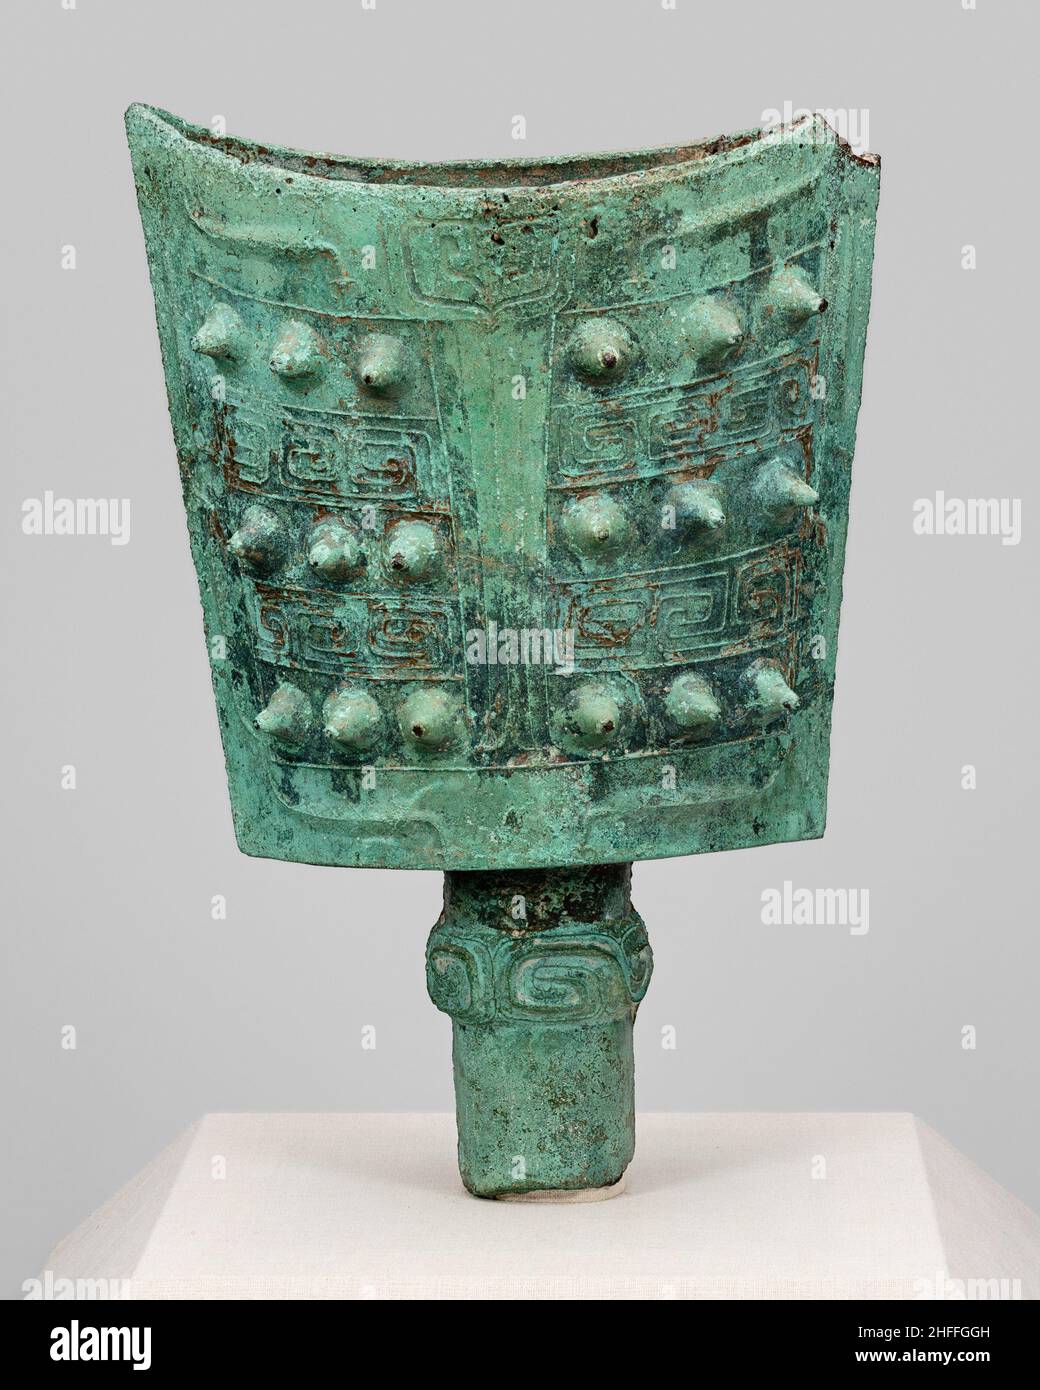 Bell (nao), Western Zhou dynasty (1046-771 B.C.). A bell with two convex sides of nearly rectangular shape and an opening at top rests on a slim cylindrical base. It boasts a green patina and is decorated with a geometric pattern and spikes. A small portion is missing at upper right. Stock Photo